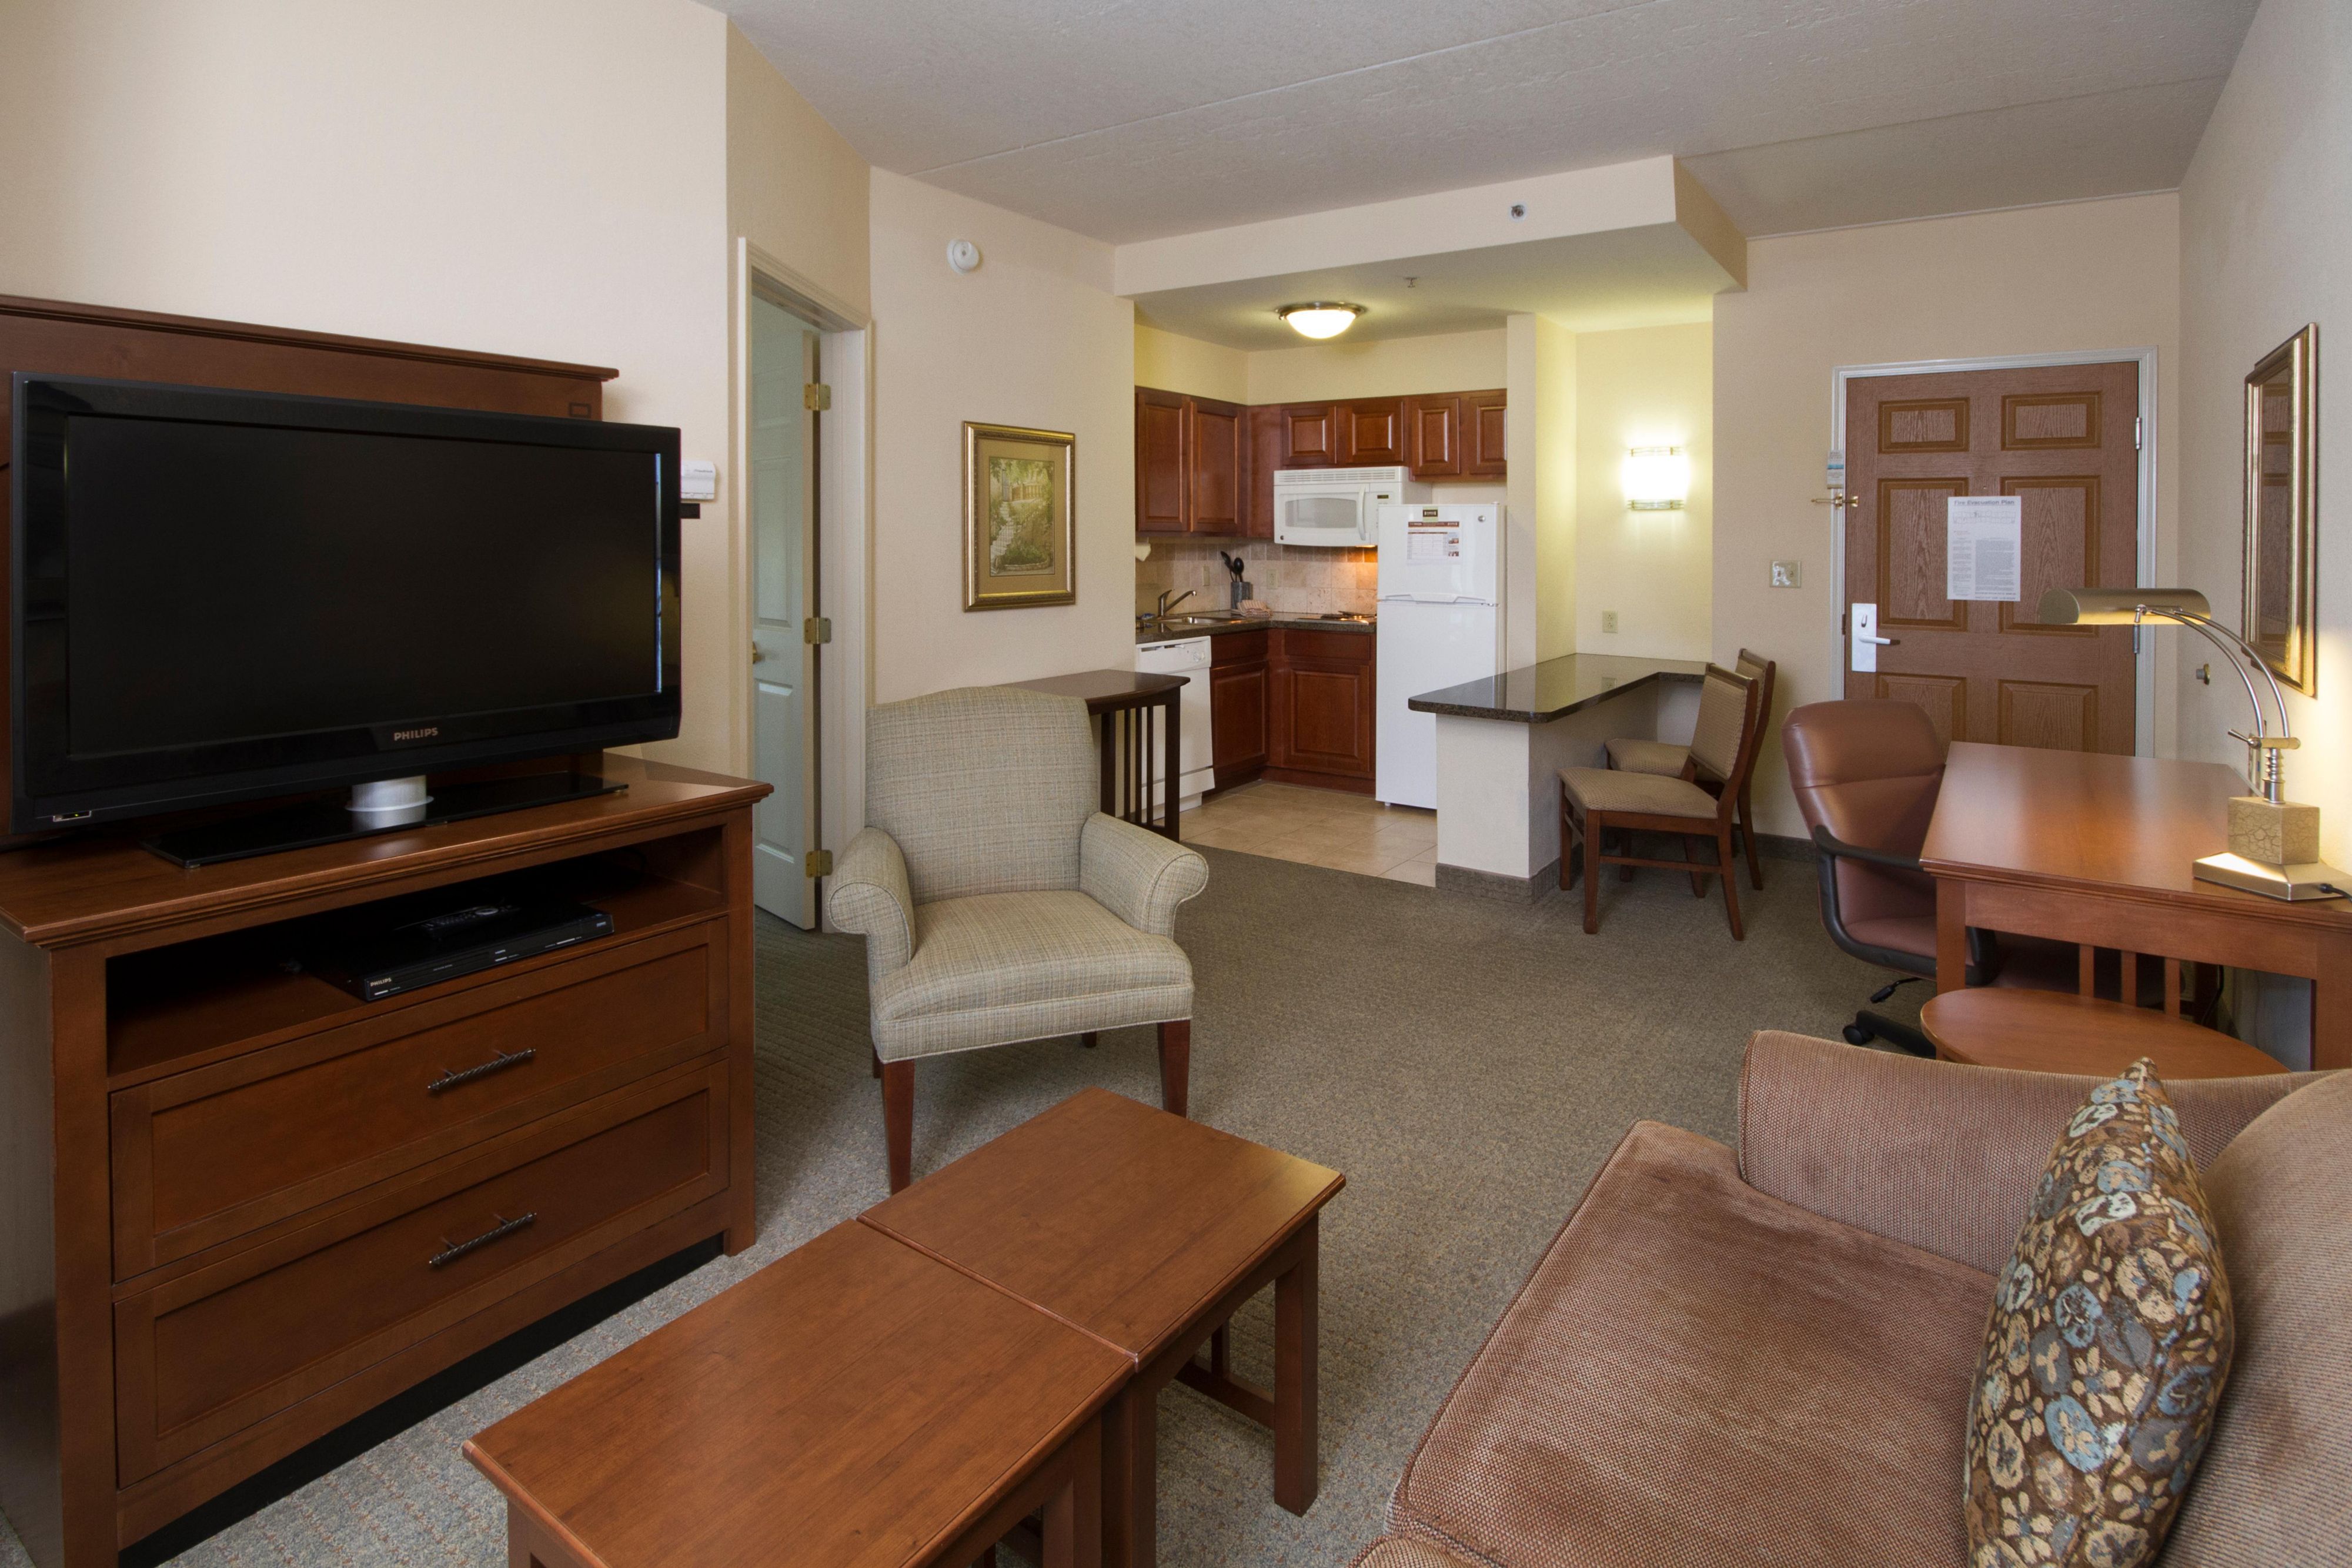 Our all-suite hotel comes with extra square footage and a fully equipped kitchen in every room.  Kitchens include a stove top, full size fridge, microwave, dishwasher, sink with garbage disposal, cookware, dinnerware and serve ware.  